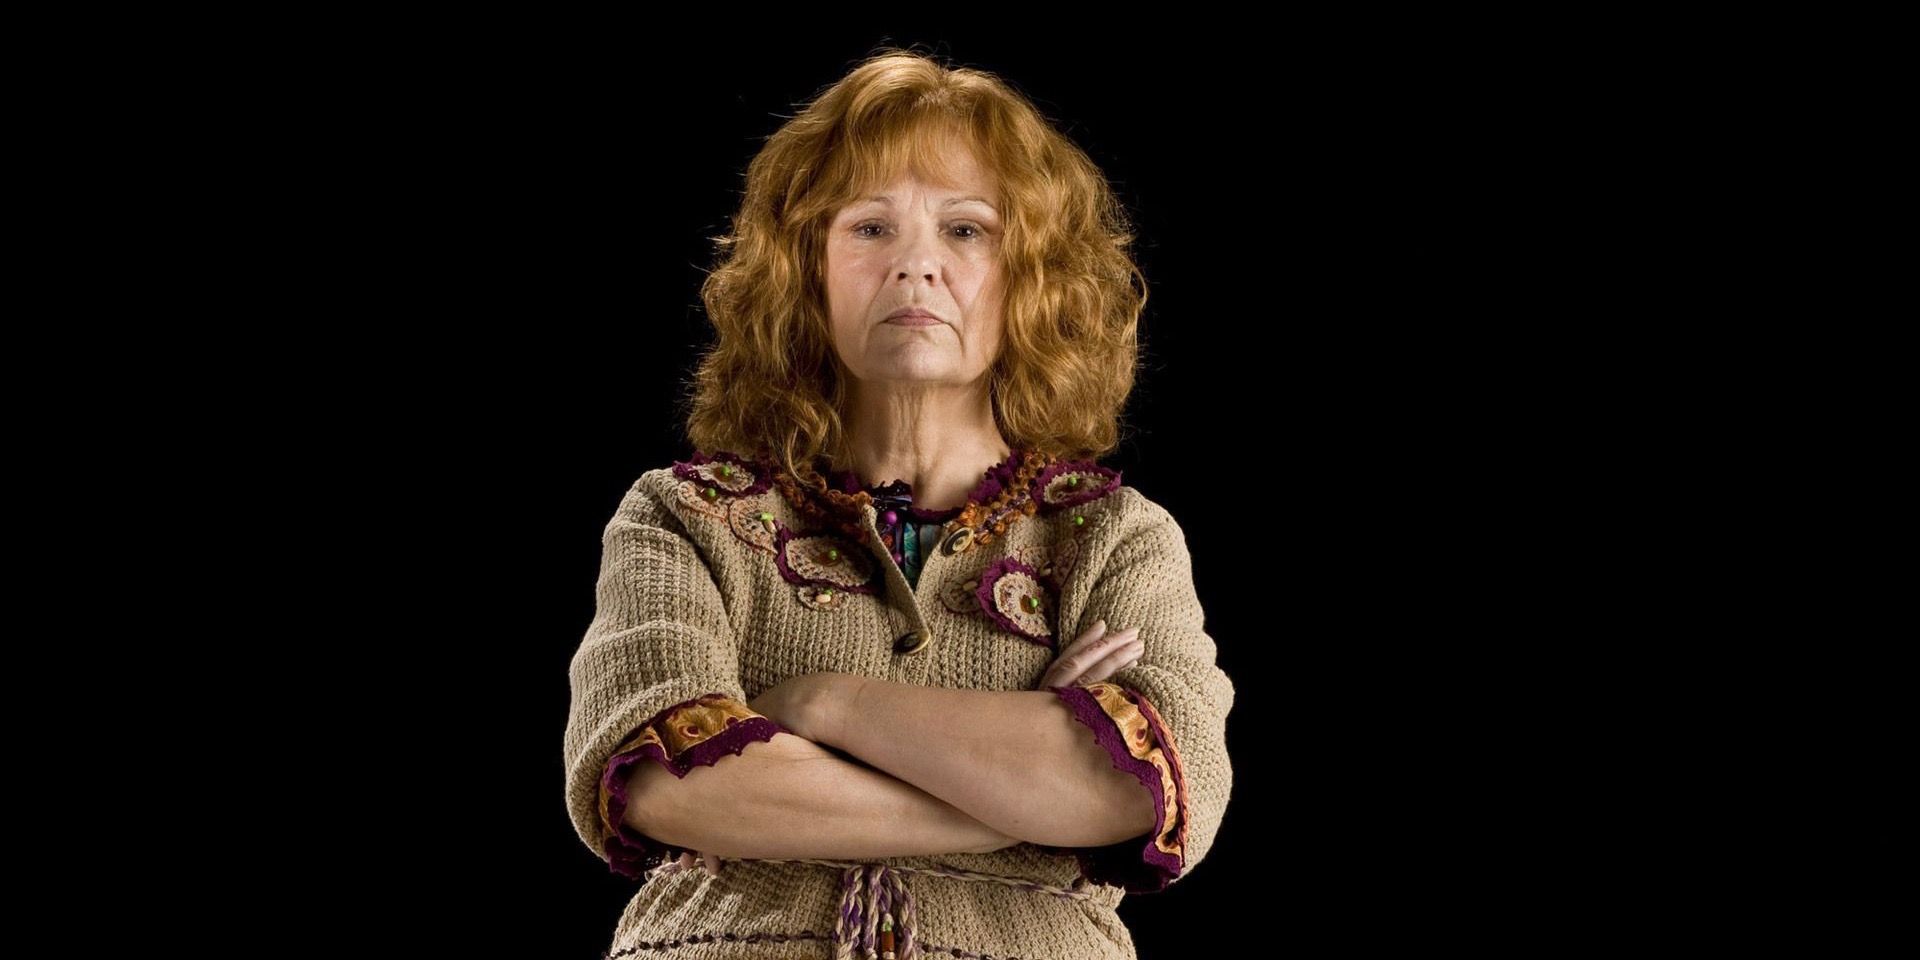 While Molly Weasley always meant the best, sometimes her interpretation of ...